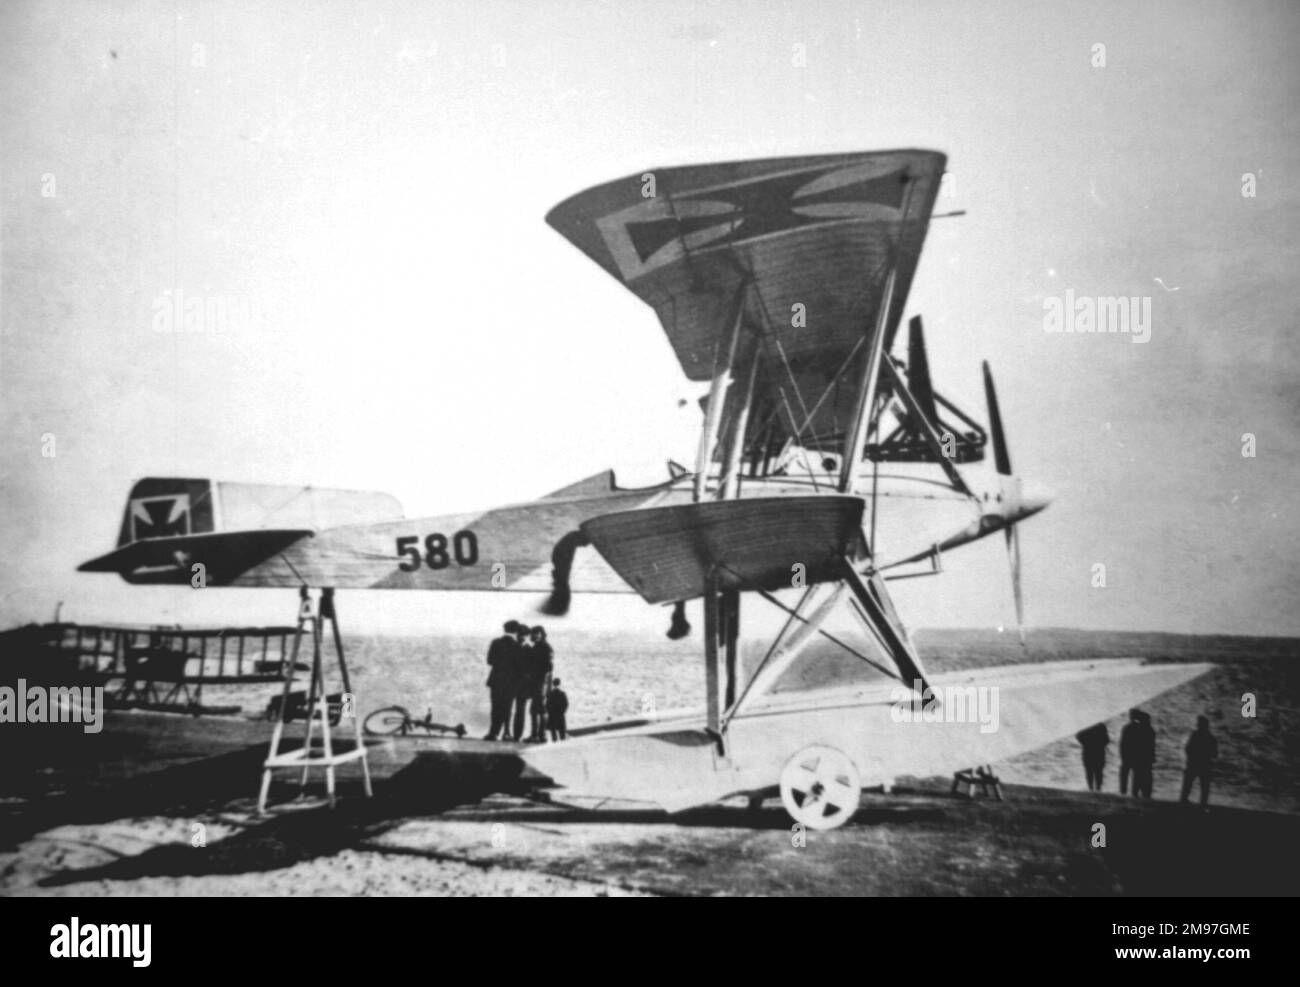 Sablatnig SF 2 German two-seater advanced trainer seaplane (serial no. 580), photographed at Warnemunde on the German Baltic coast.  This machine was the first of 26 delivered to the German navy between June 1916 and May 1917. Stock Photo